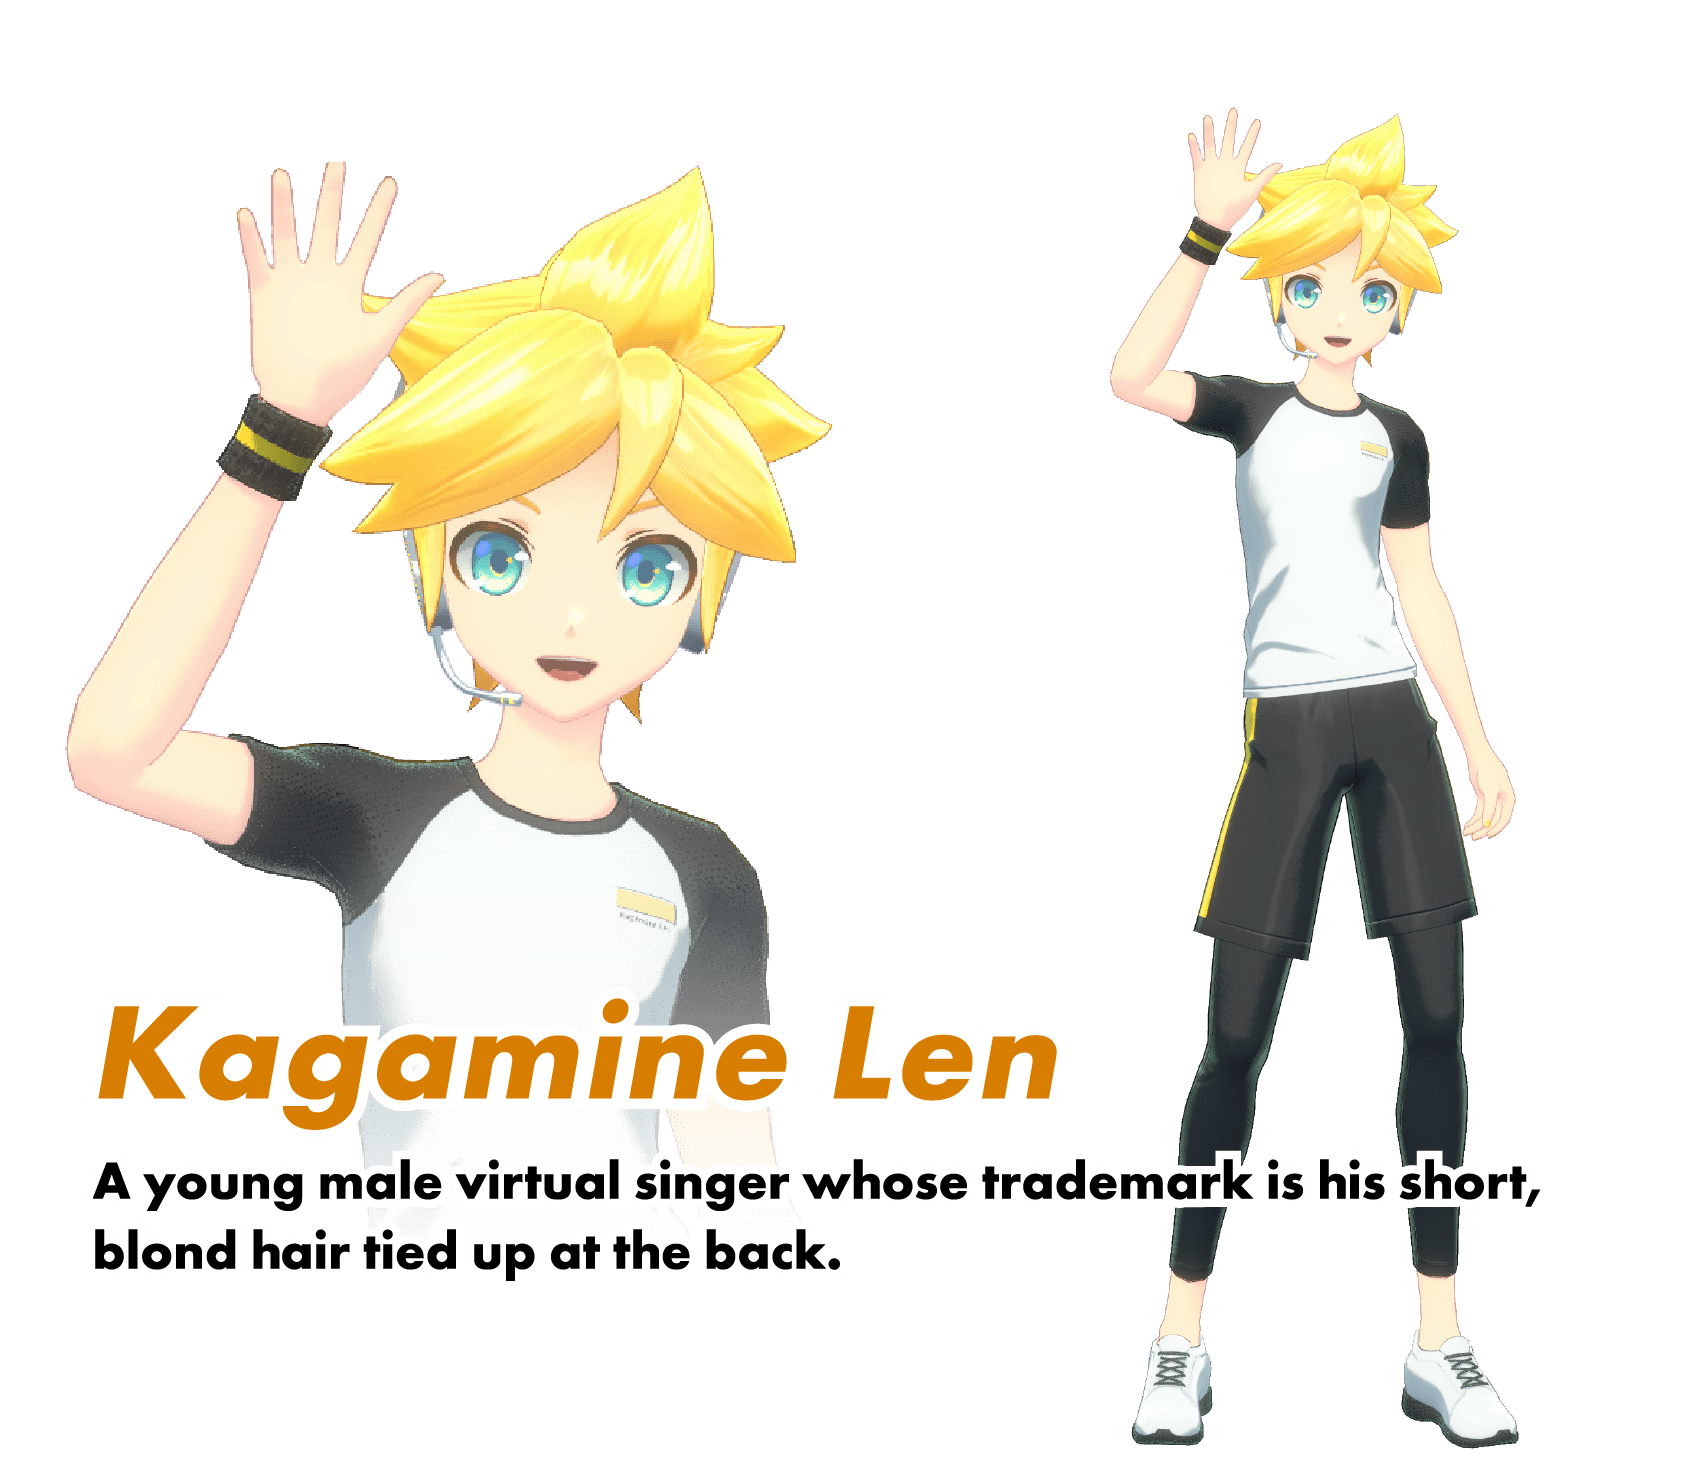 Kagamine Len:A young male virtual singer whose trademark is his short,blond hair tied up at the back.